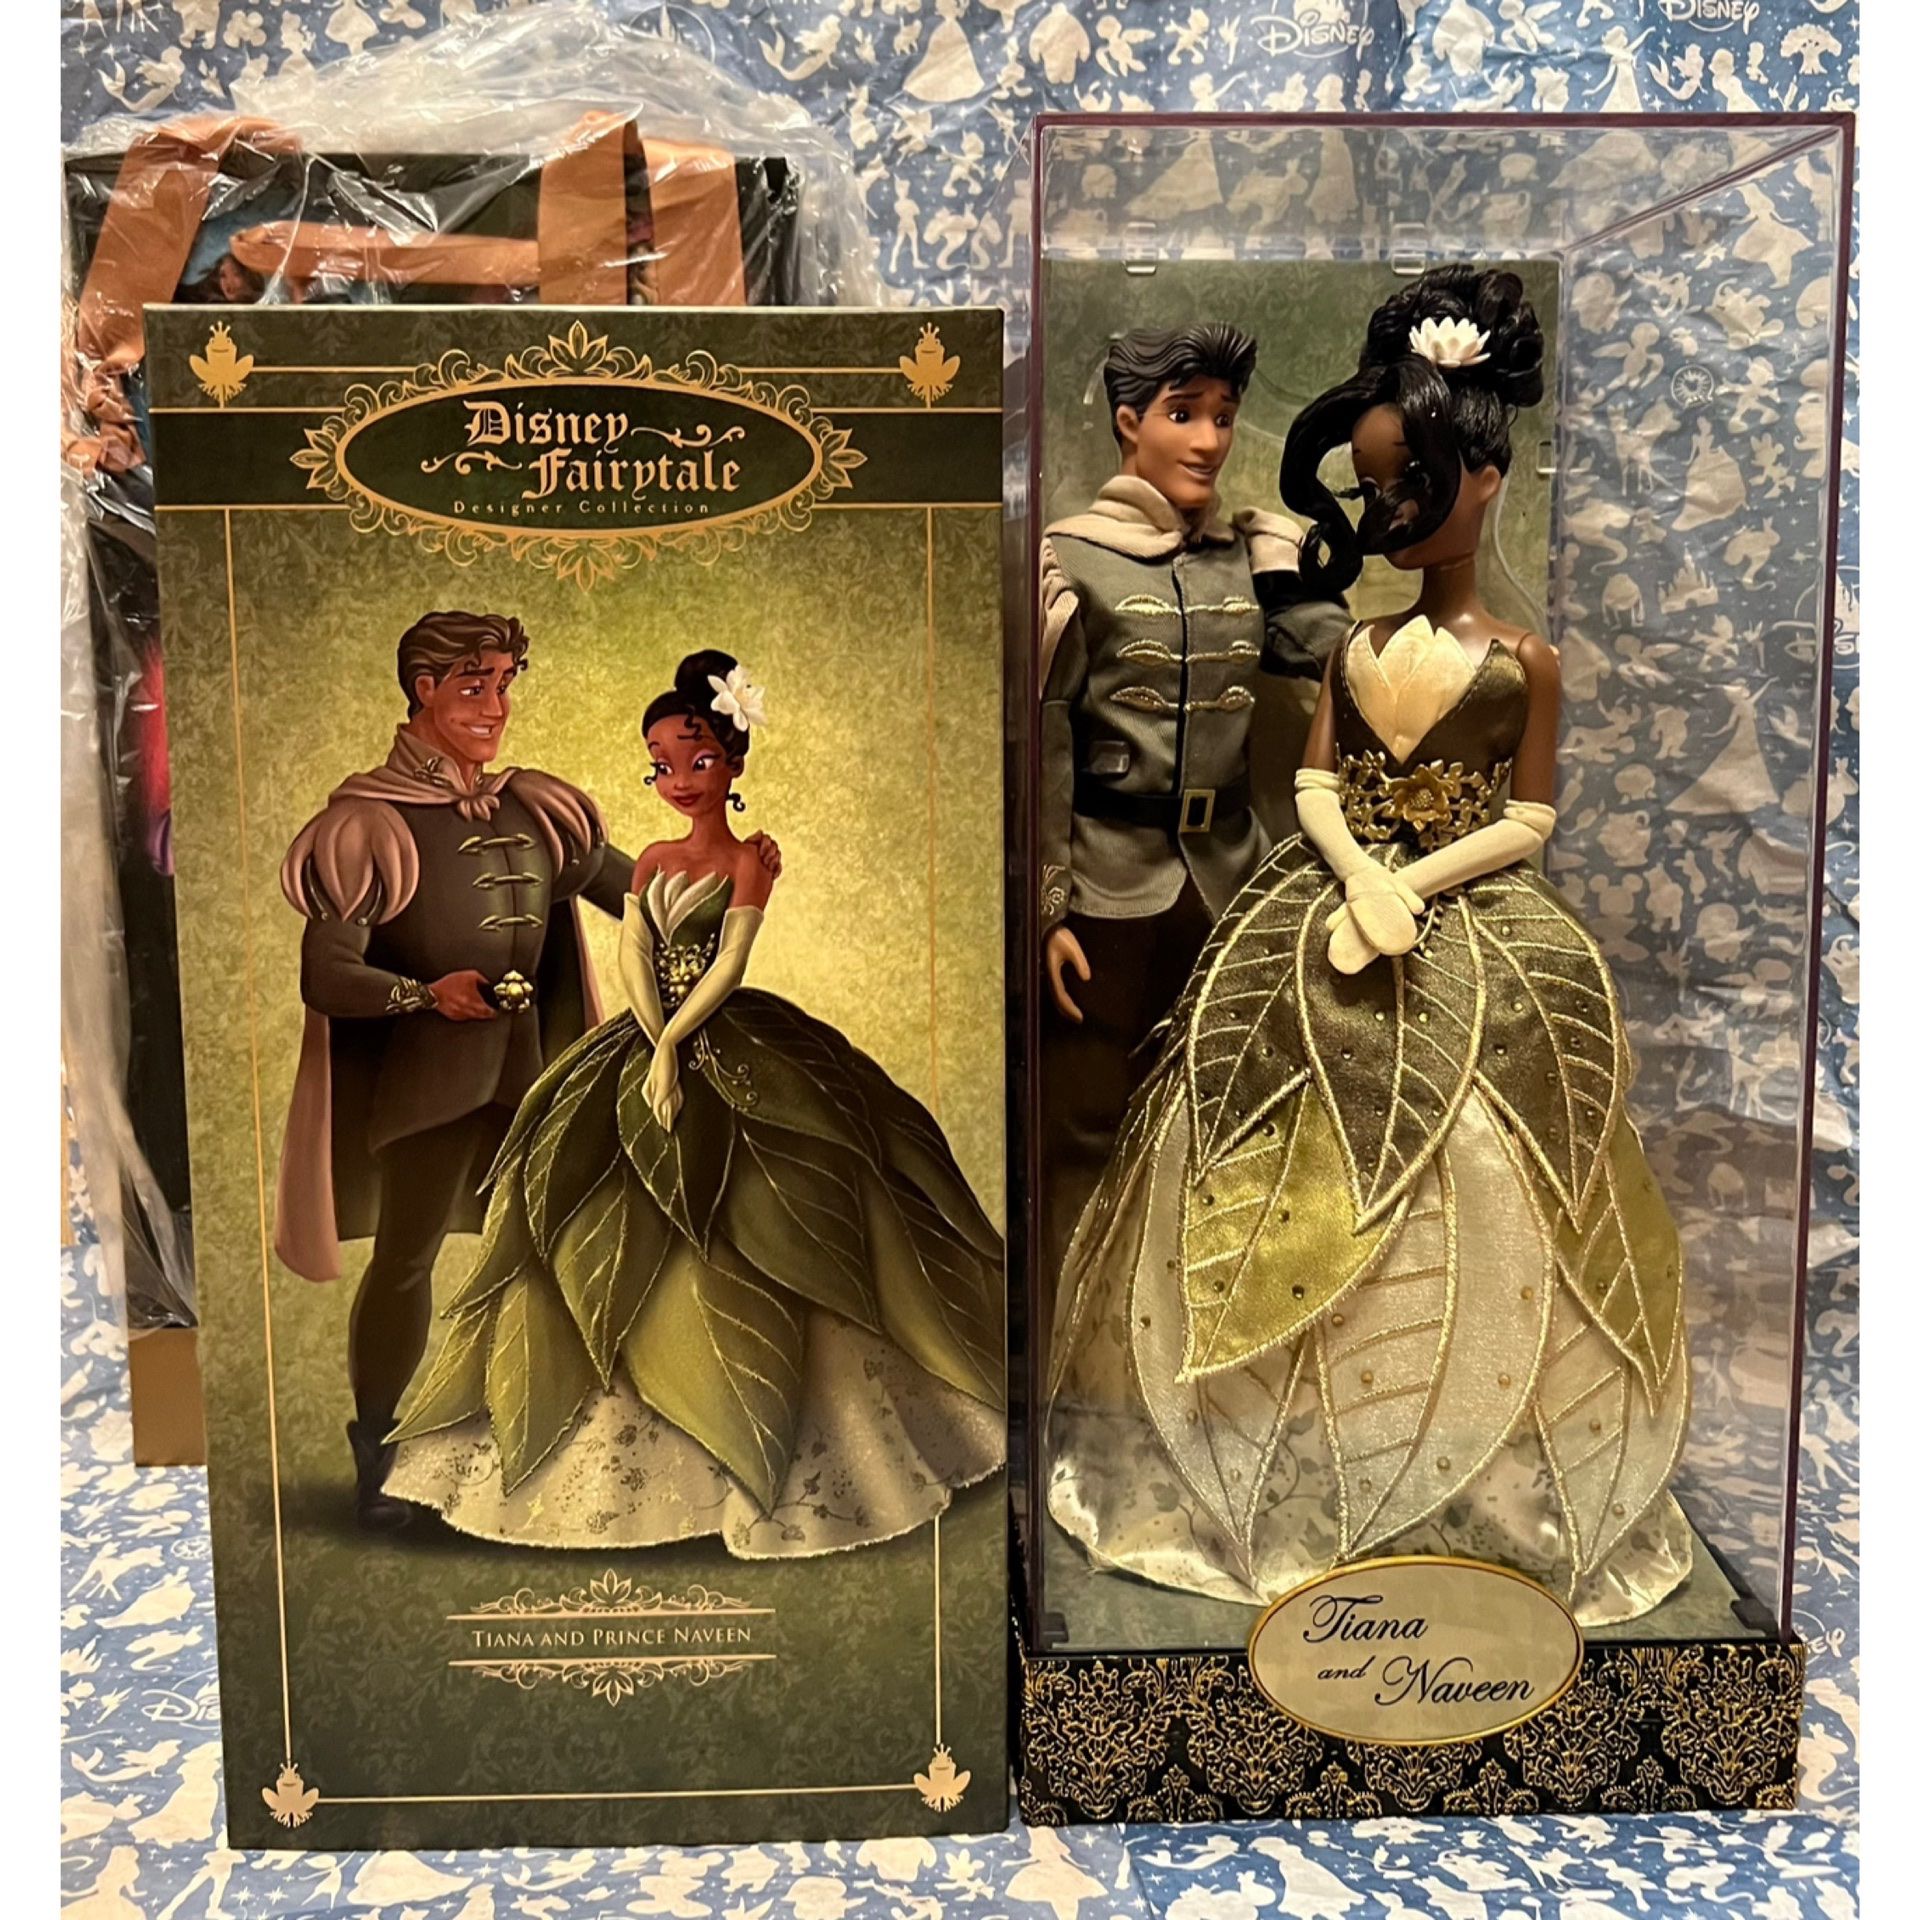 New Princess Tiana Disney Designer Collection Doll Available at